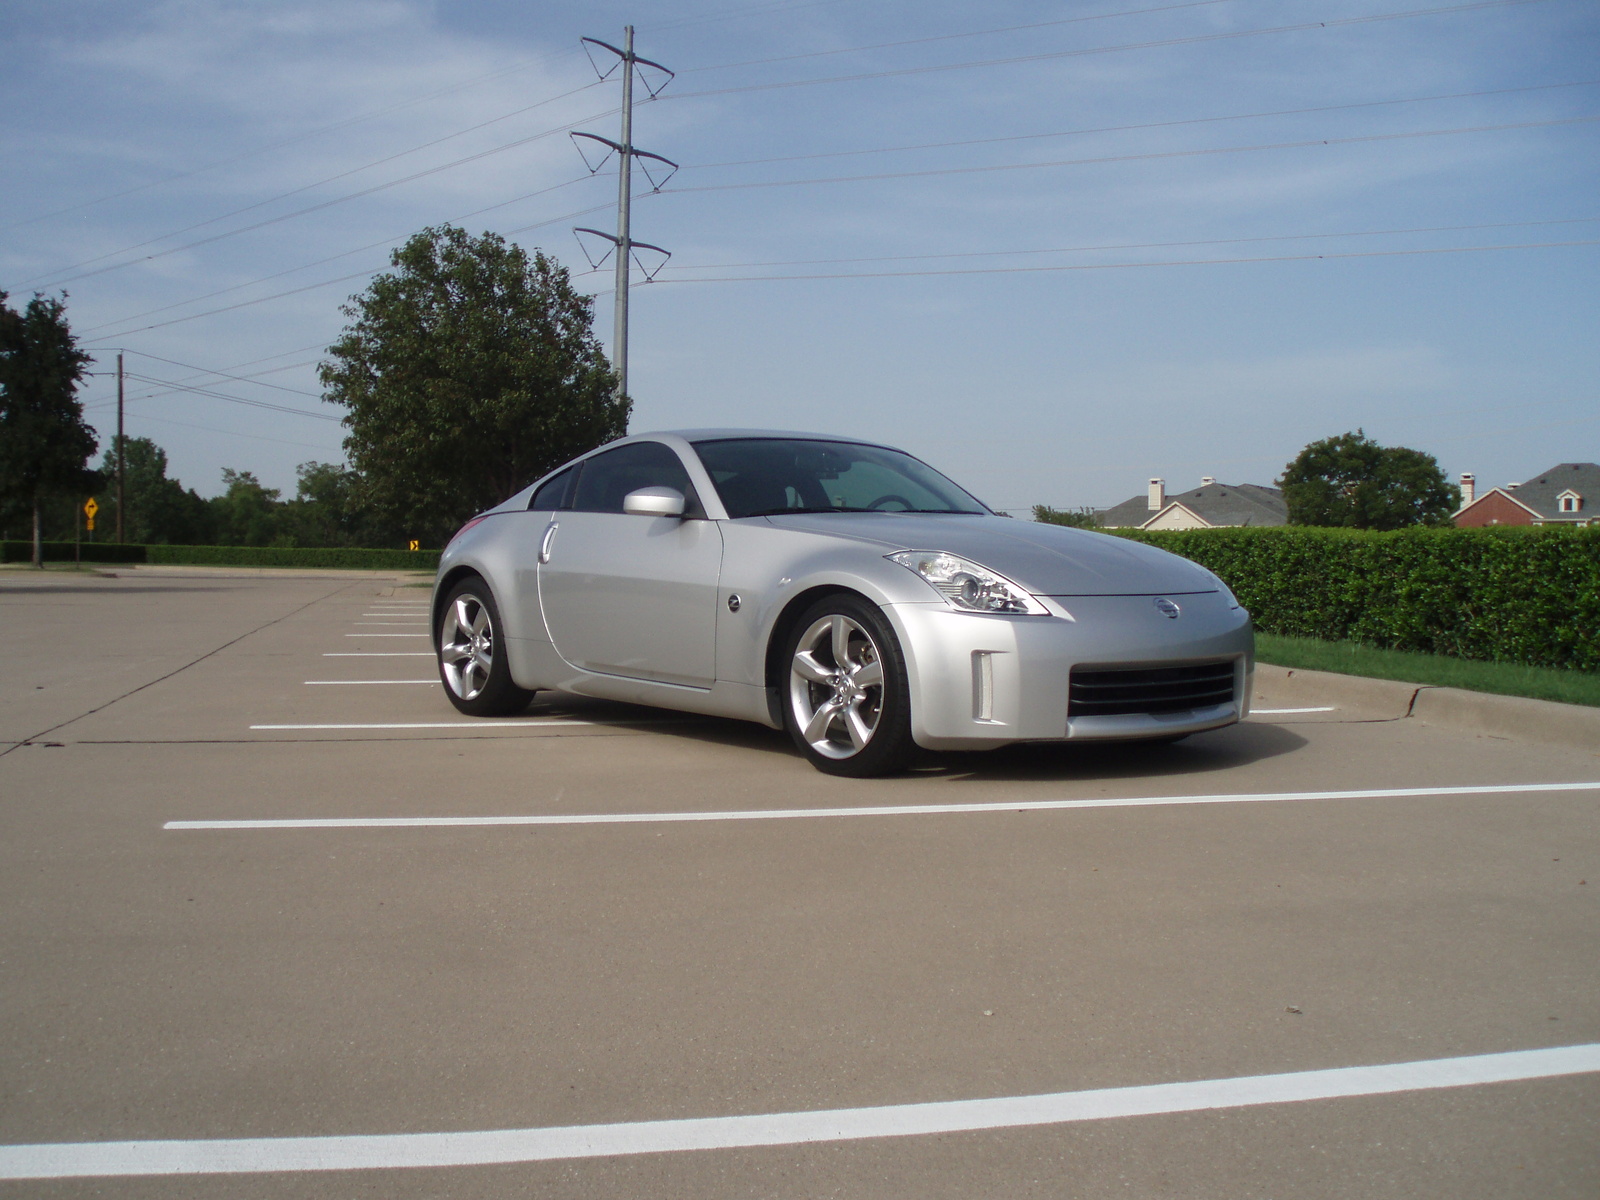 Nissan 350z convertible for sale calgary #1